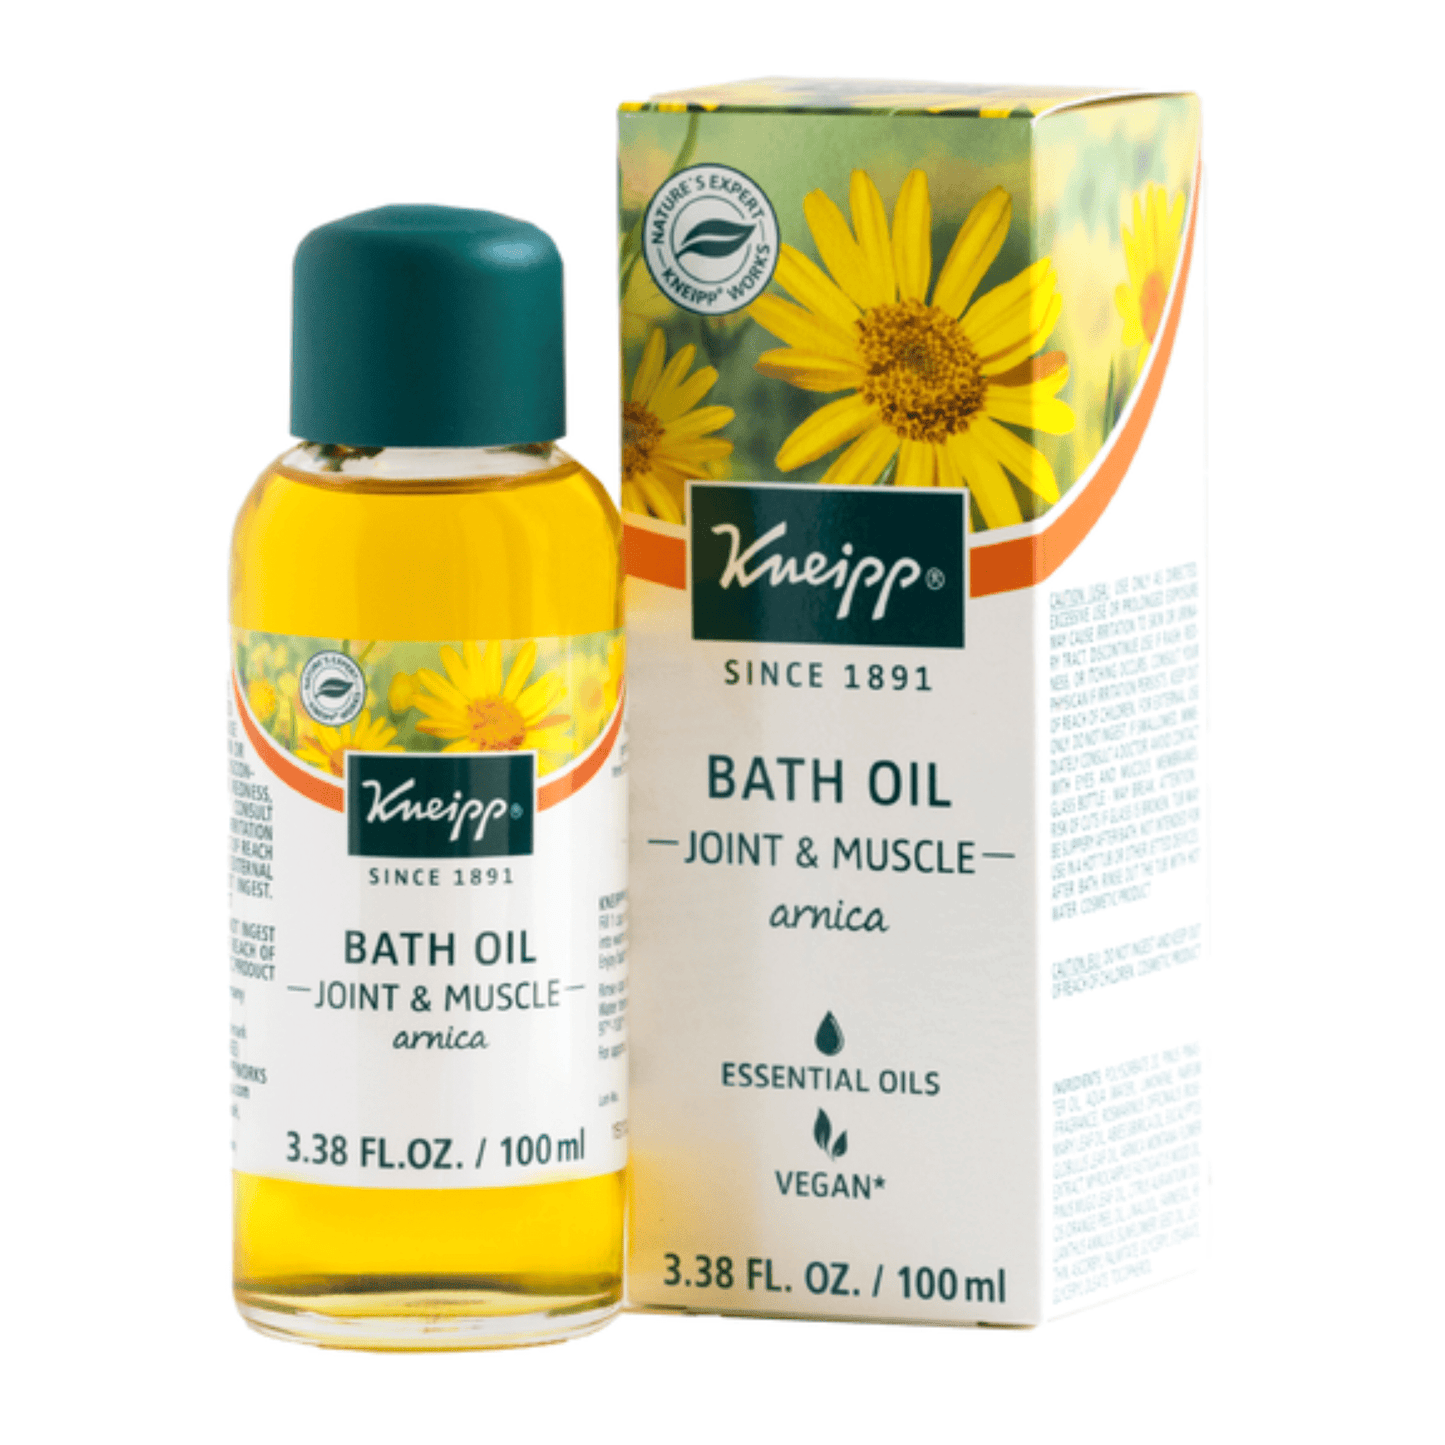 Primary Image of Arnica Joint & Muscle Bath Oil